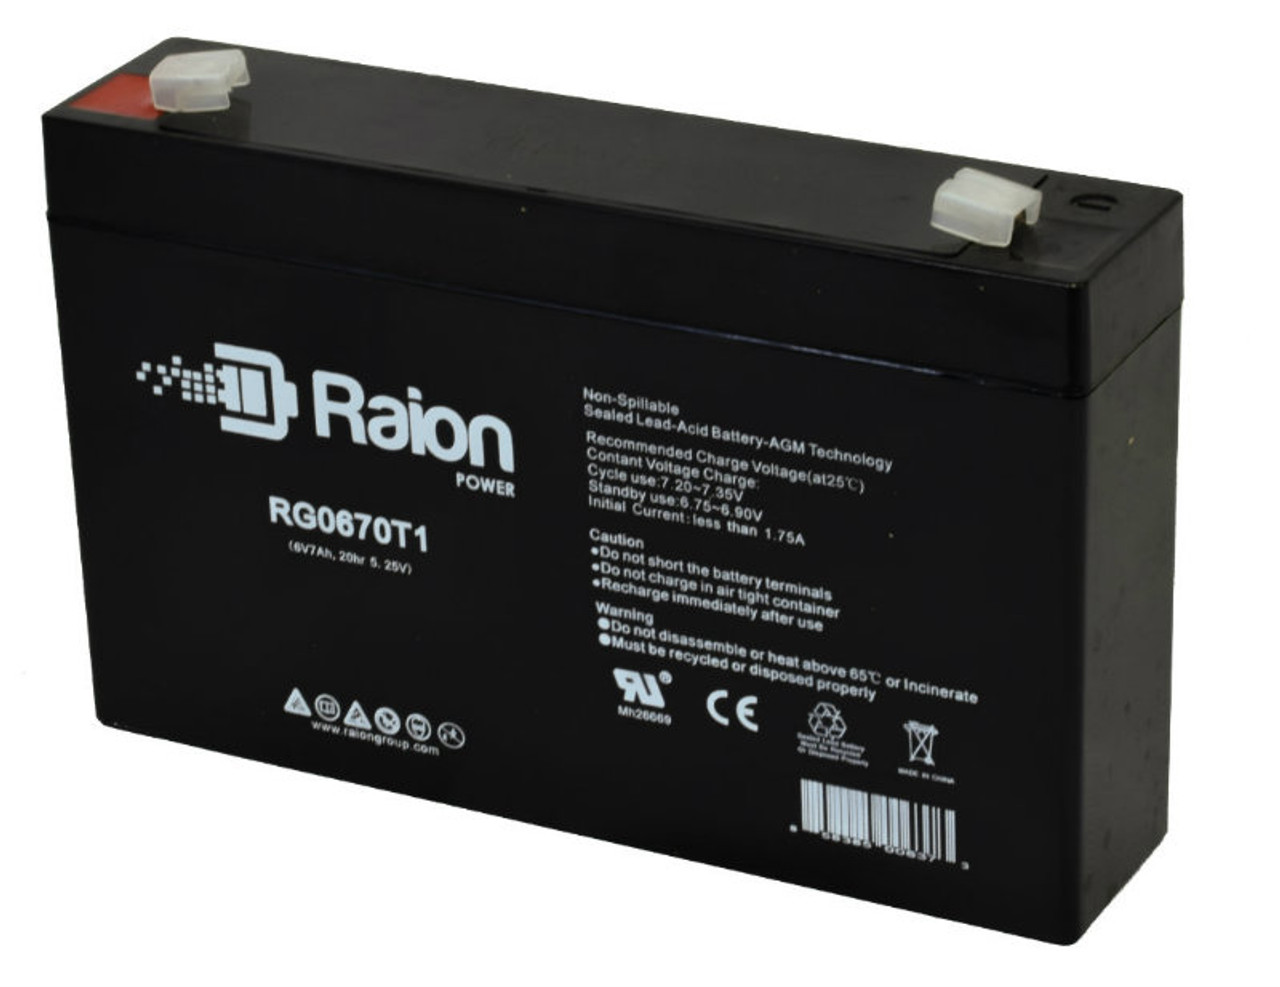 Raion Power RG0670T1 6V 7Ah Replacement Emergency Lighting Battery for Sonnenschein N67IWC